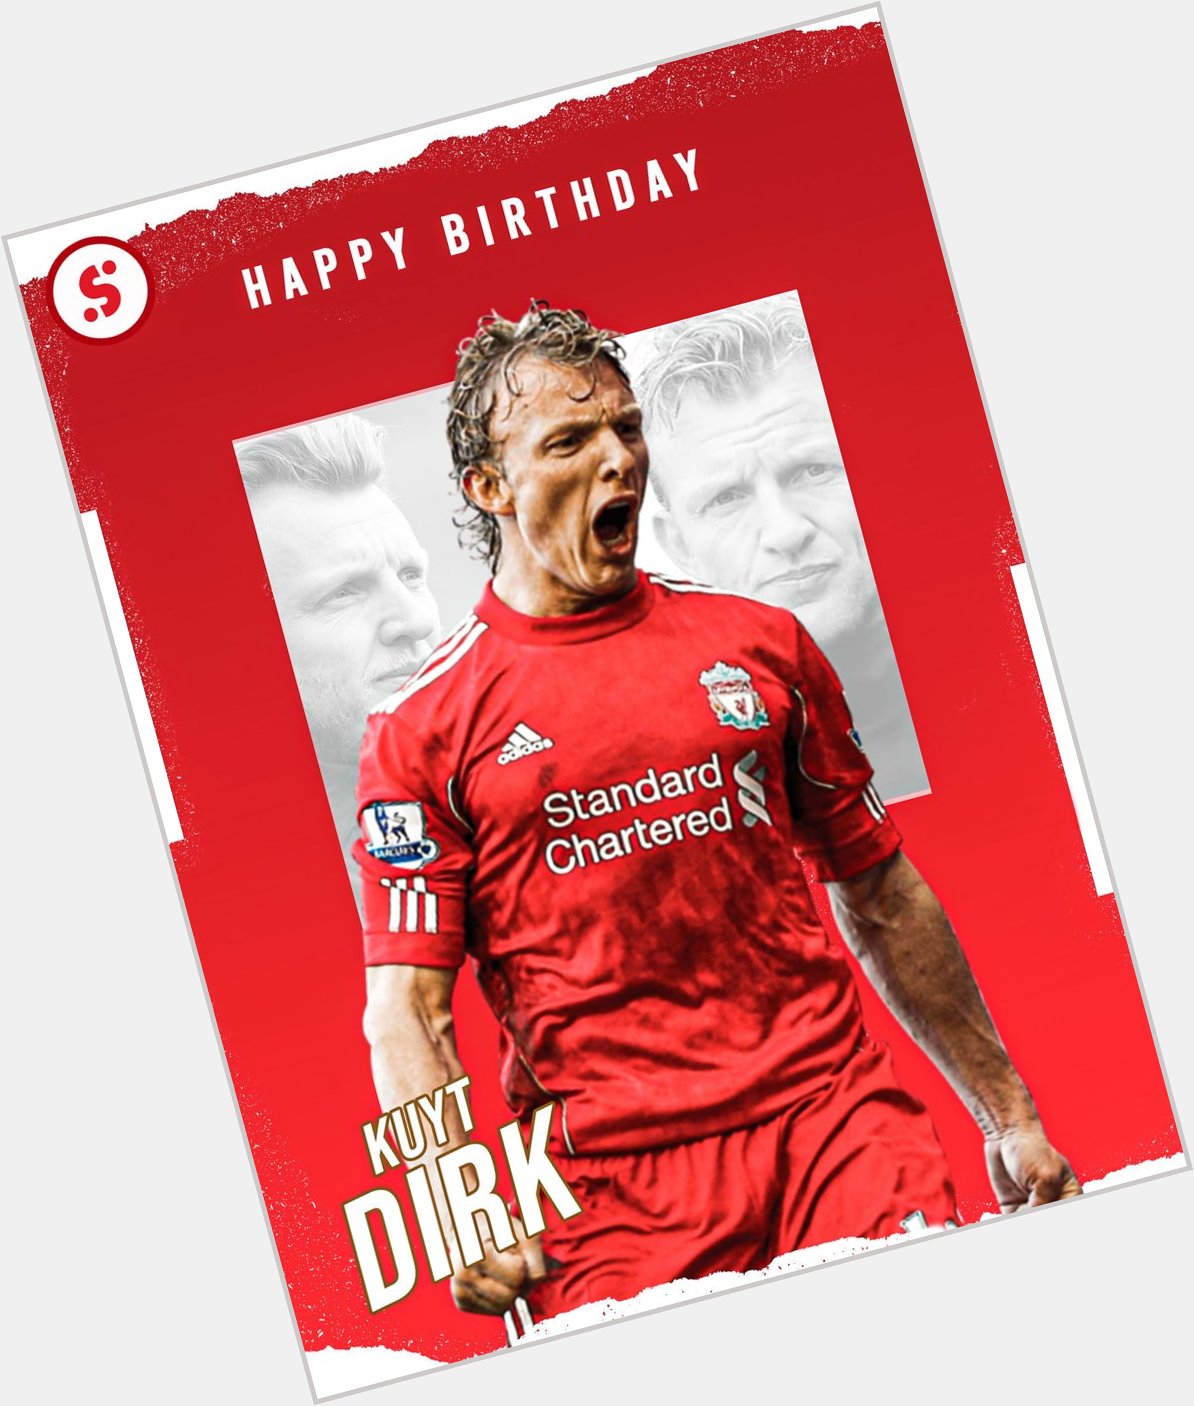 Happy 4  2  nd Birthday to former Liverpool forward Dirk Kuyt    